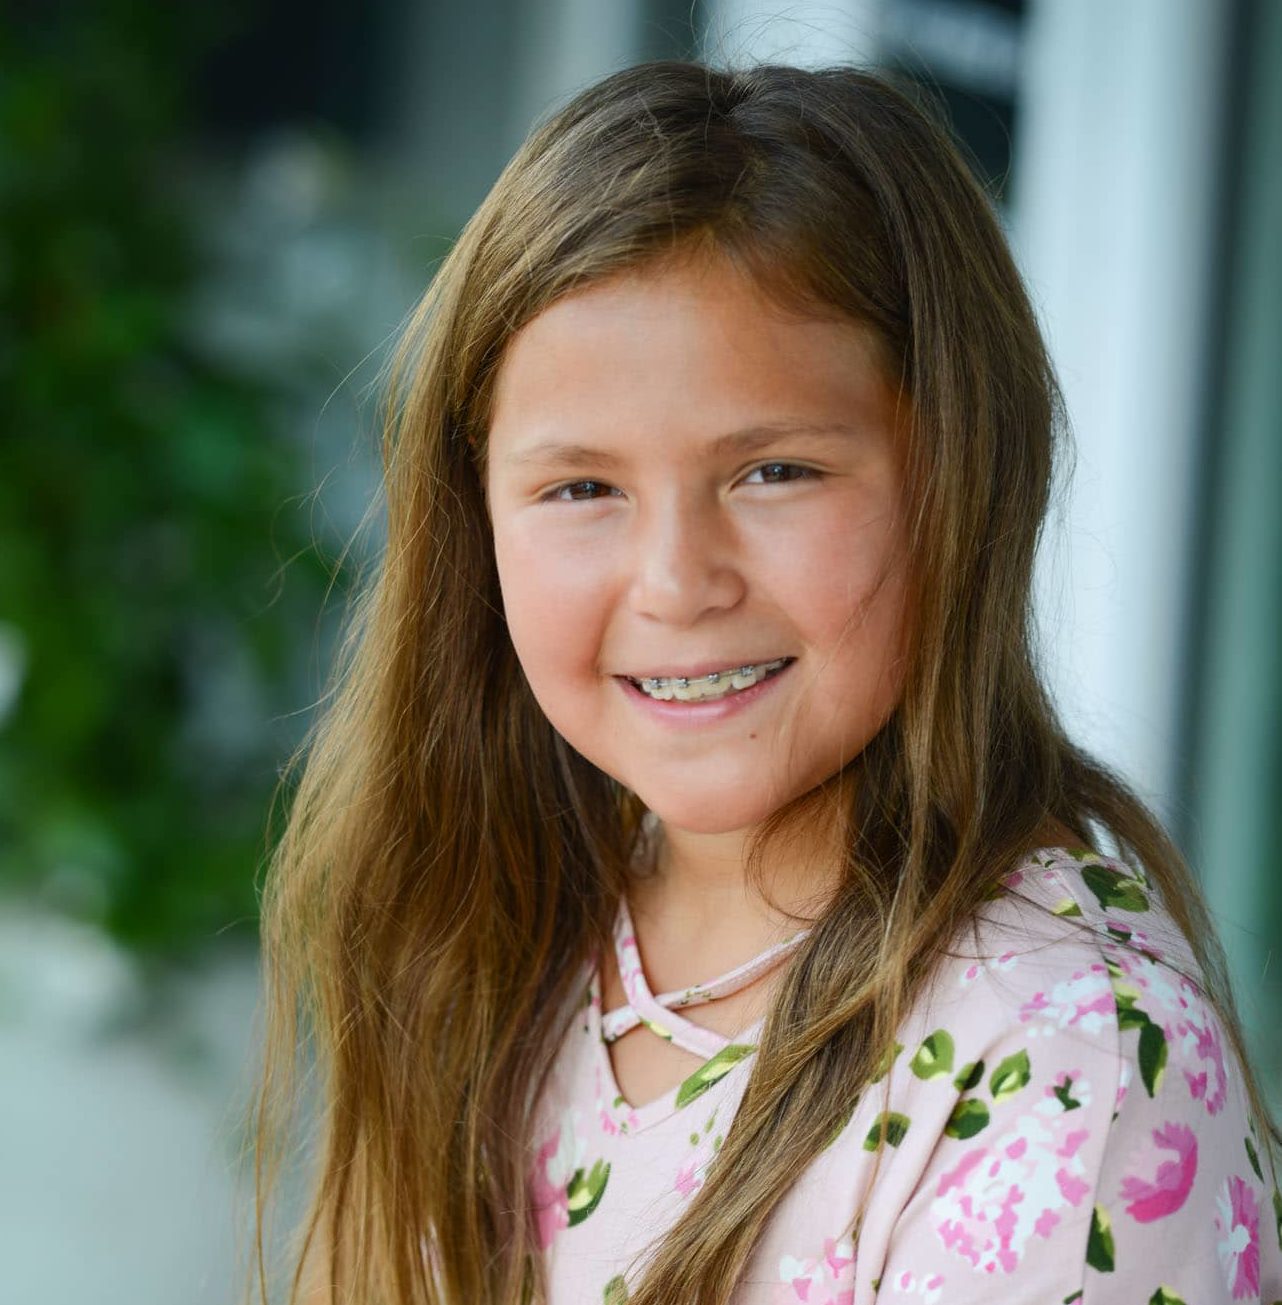 A young girl with a floral shirt and brown hair and braces.